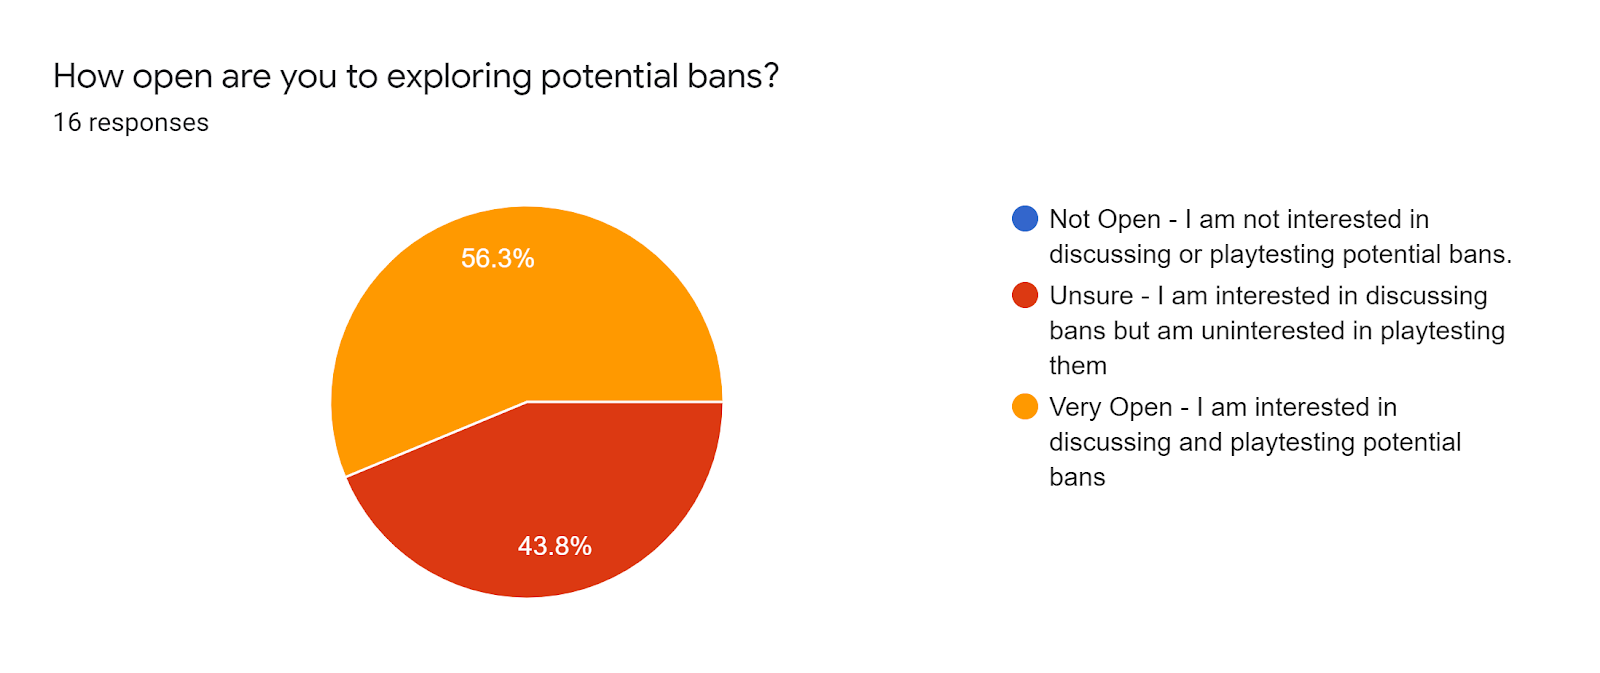 Forms response chart. Question title: How open are you to exploring potential bans?. Number of responses: 16 responses.